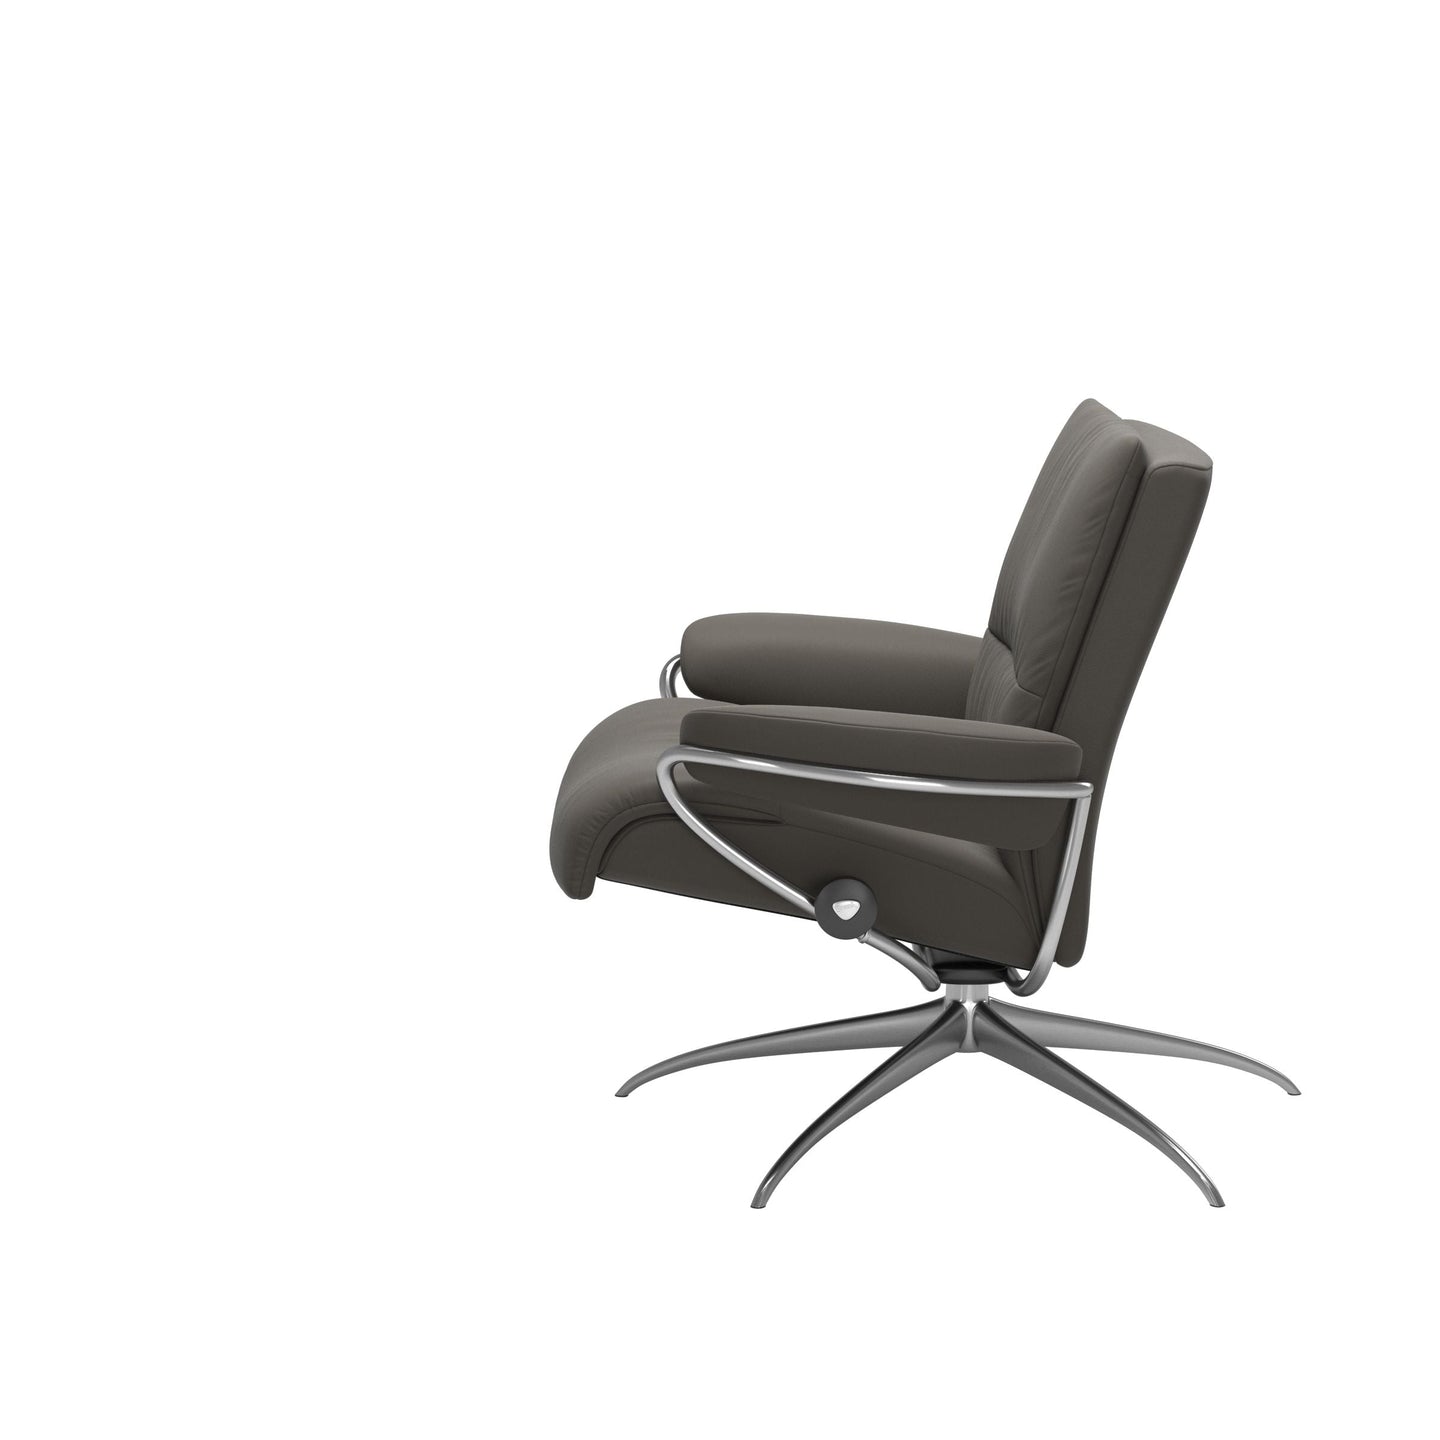 Stressless® Tokyo chair Low back with standard Base